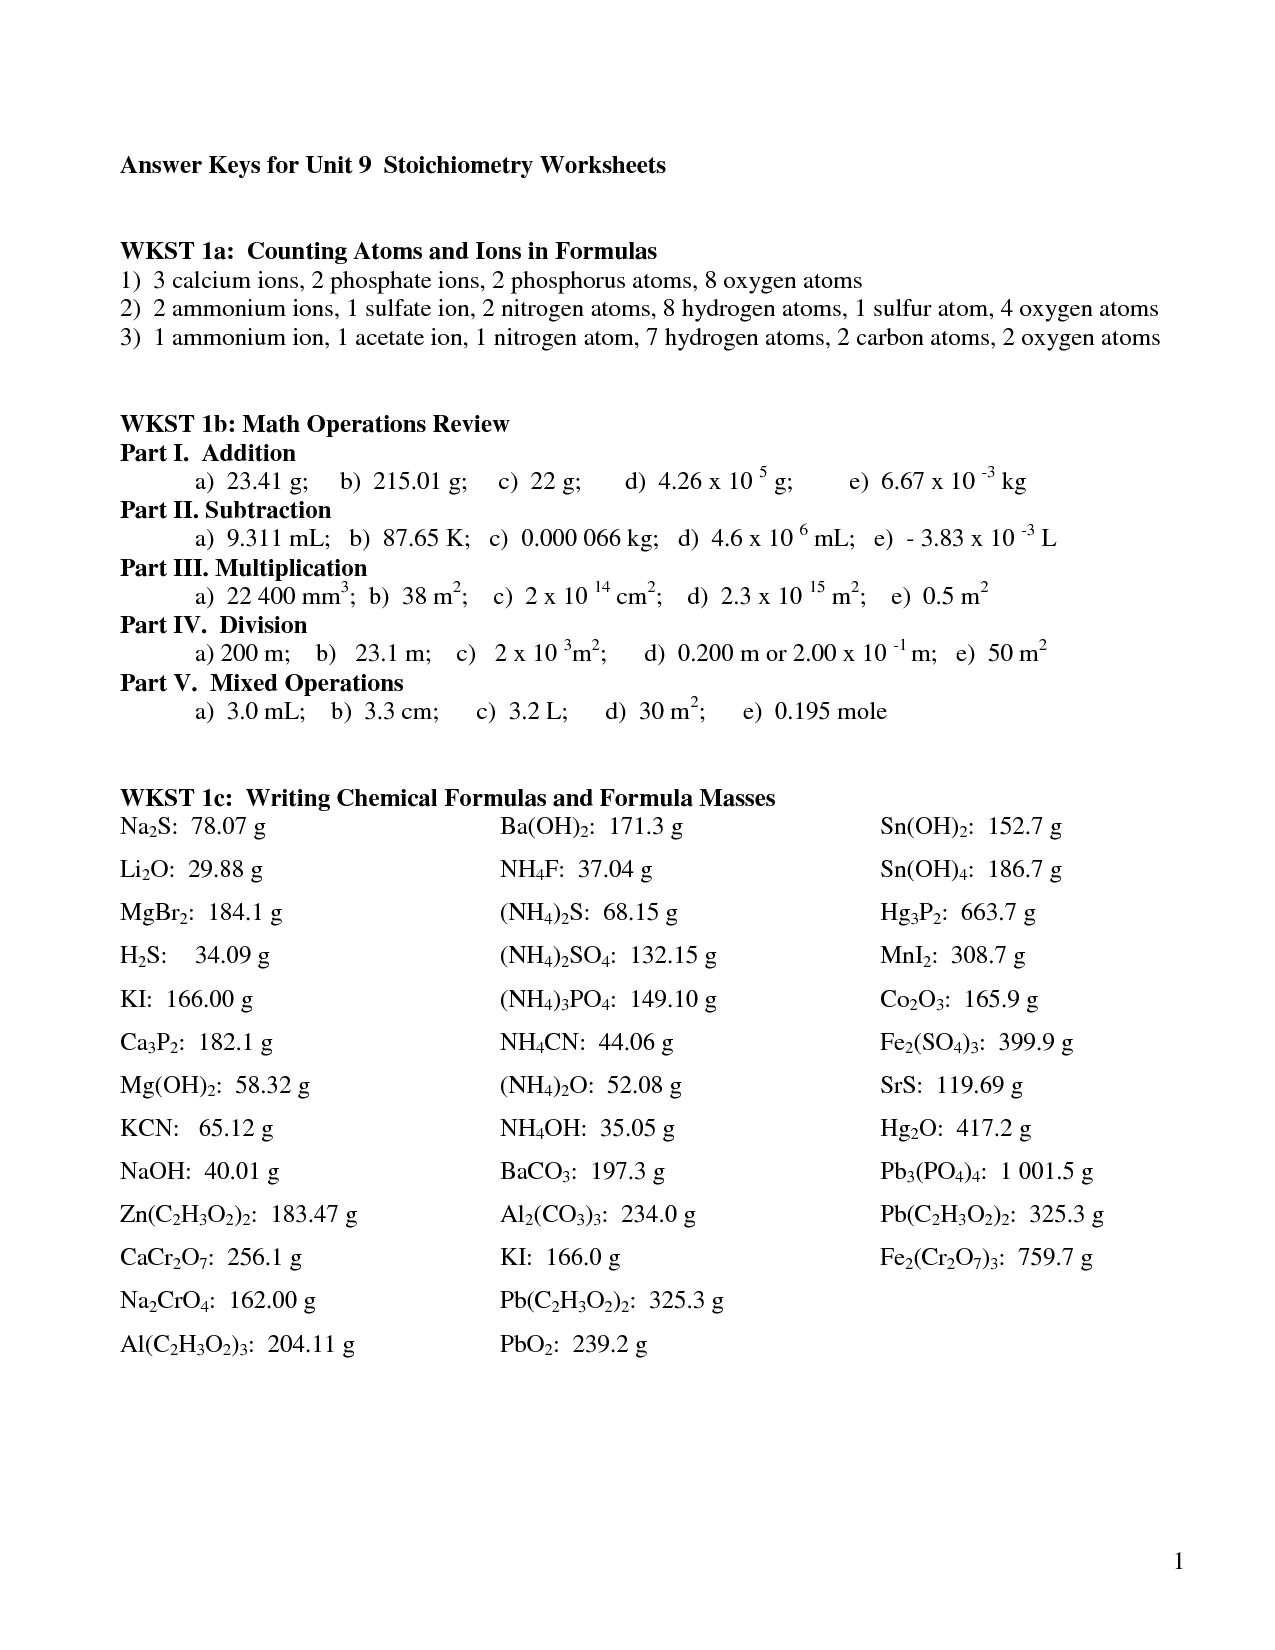 17-best-images-of-counting-atoms-worksheet-answers-counting-atoms-worksheet-answer-key